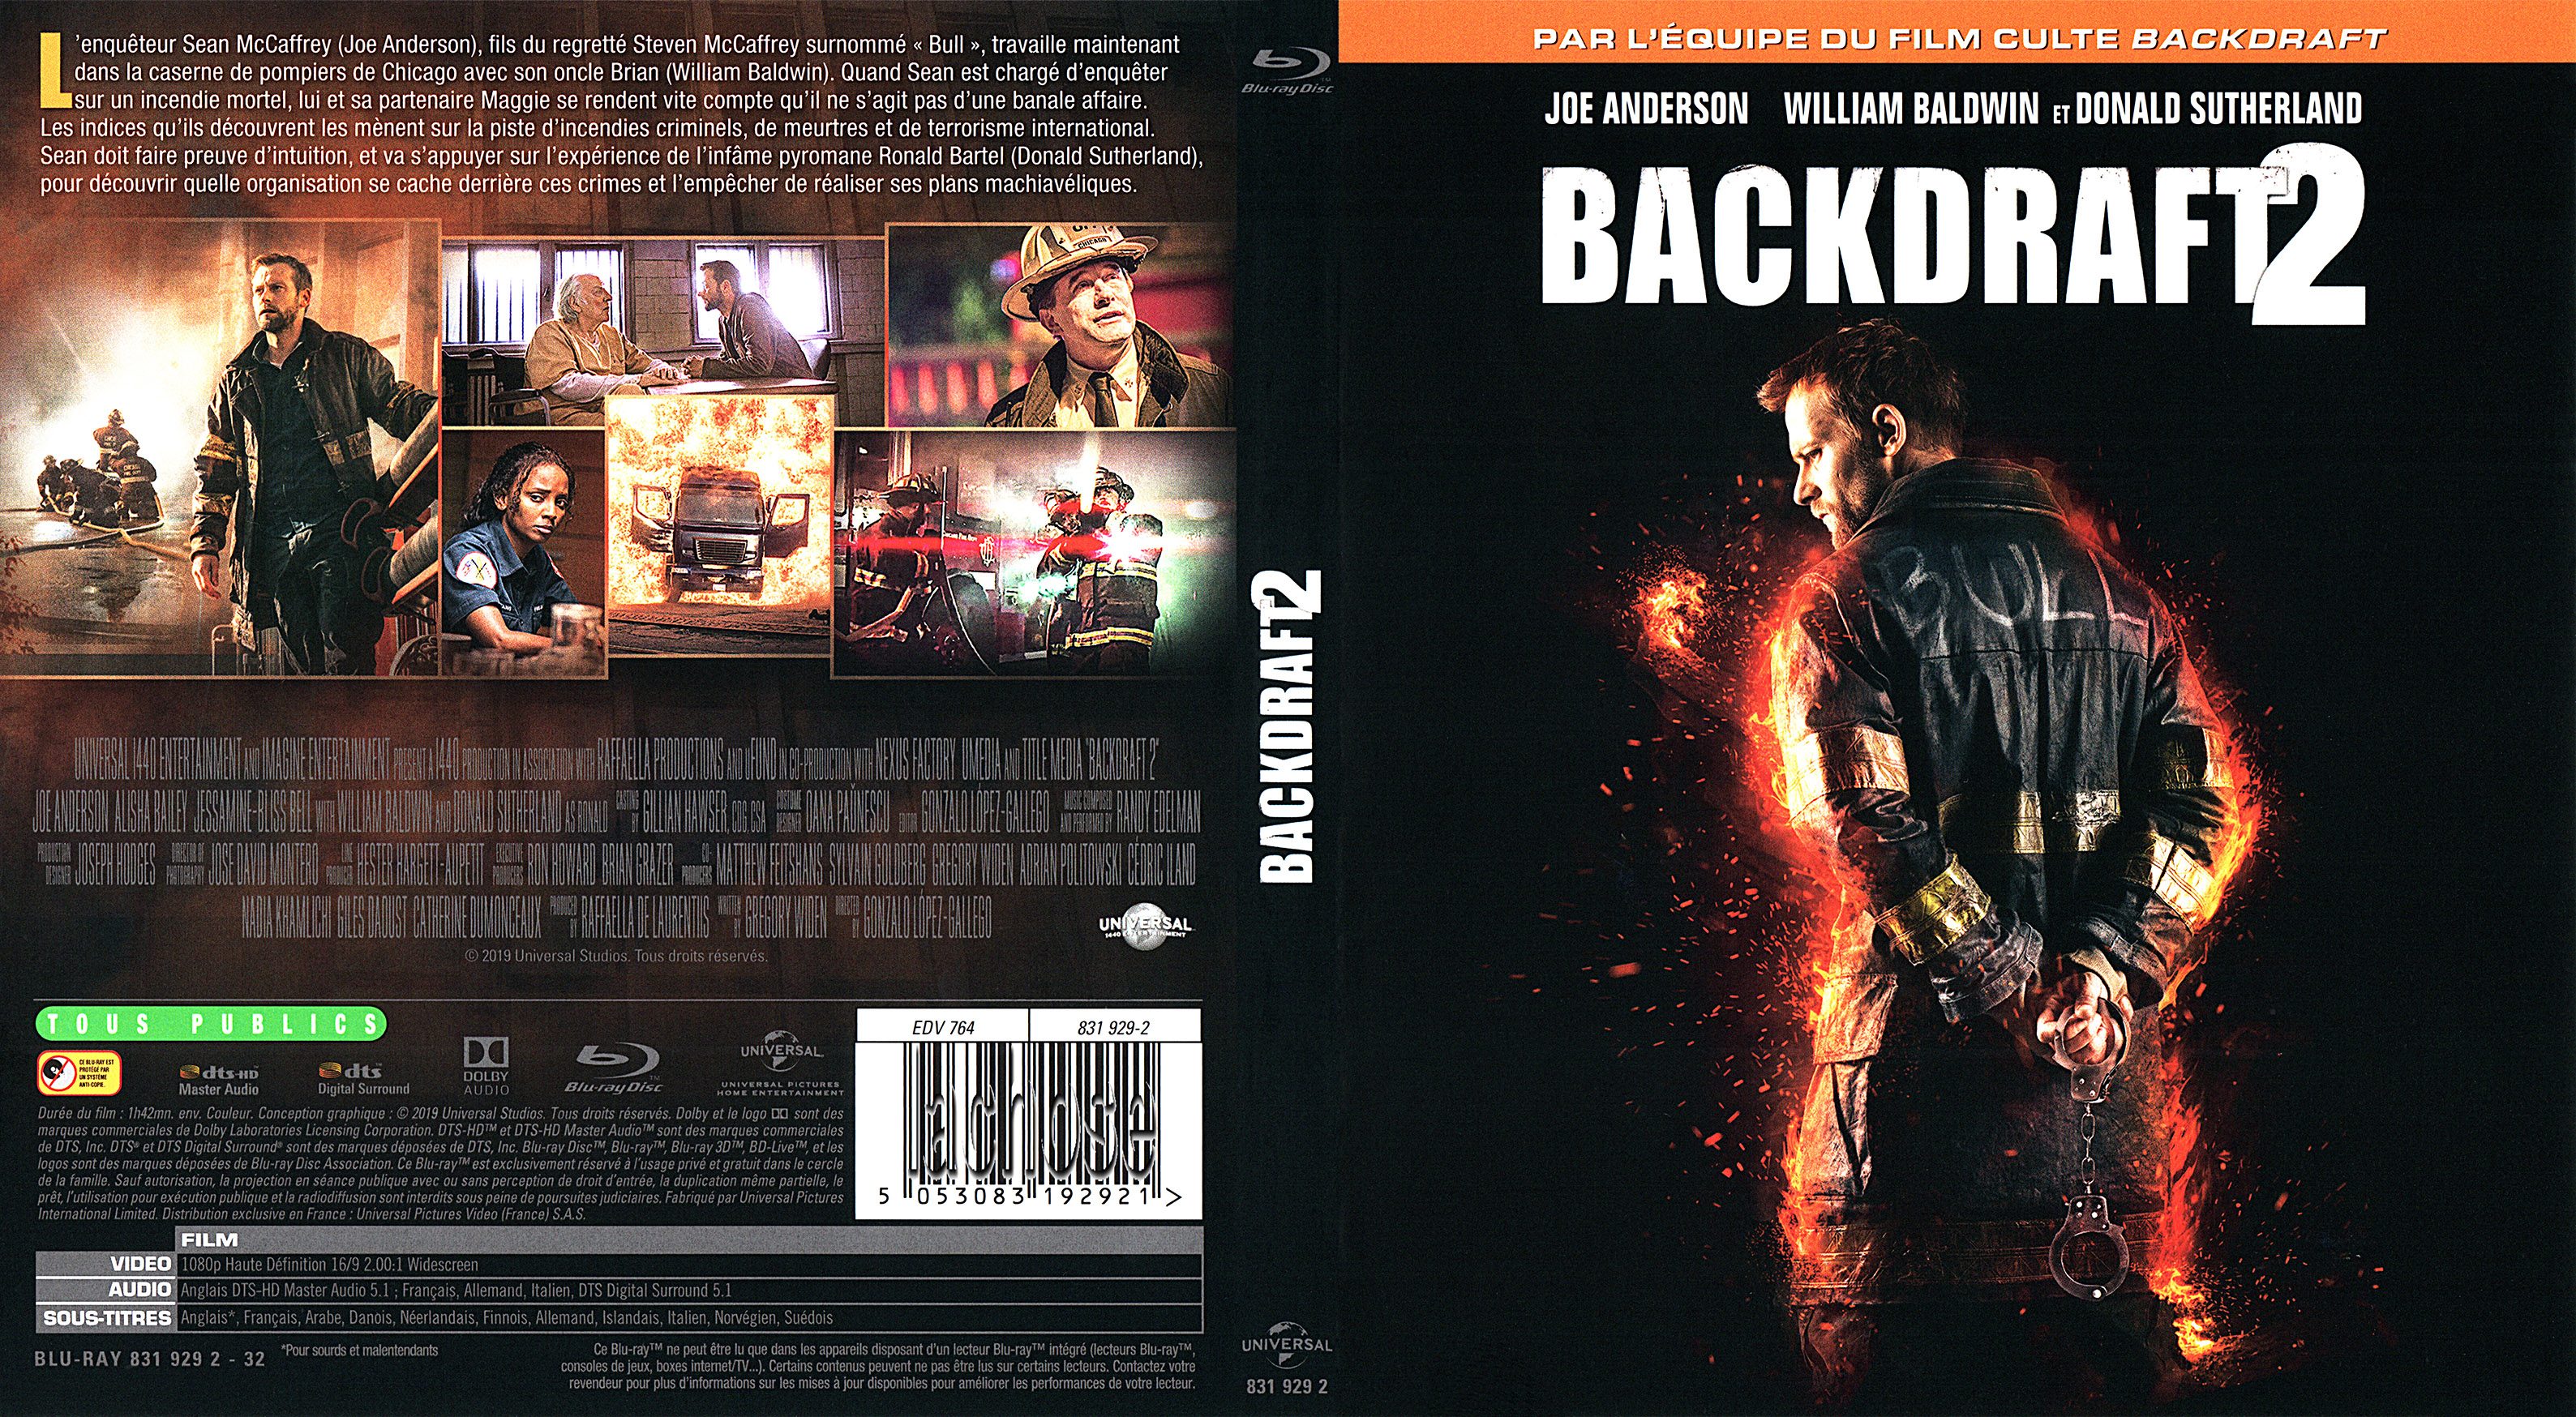 Jaquette DVD Backdraft 2 (BLU-RAY)